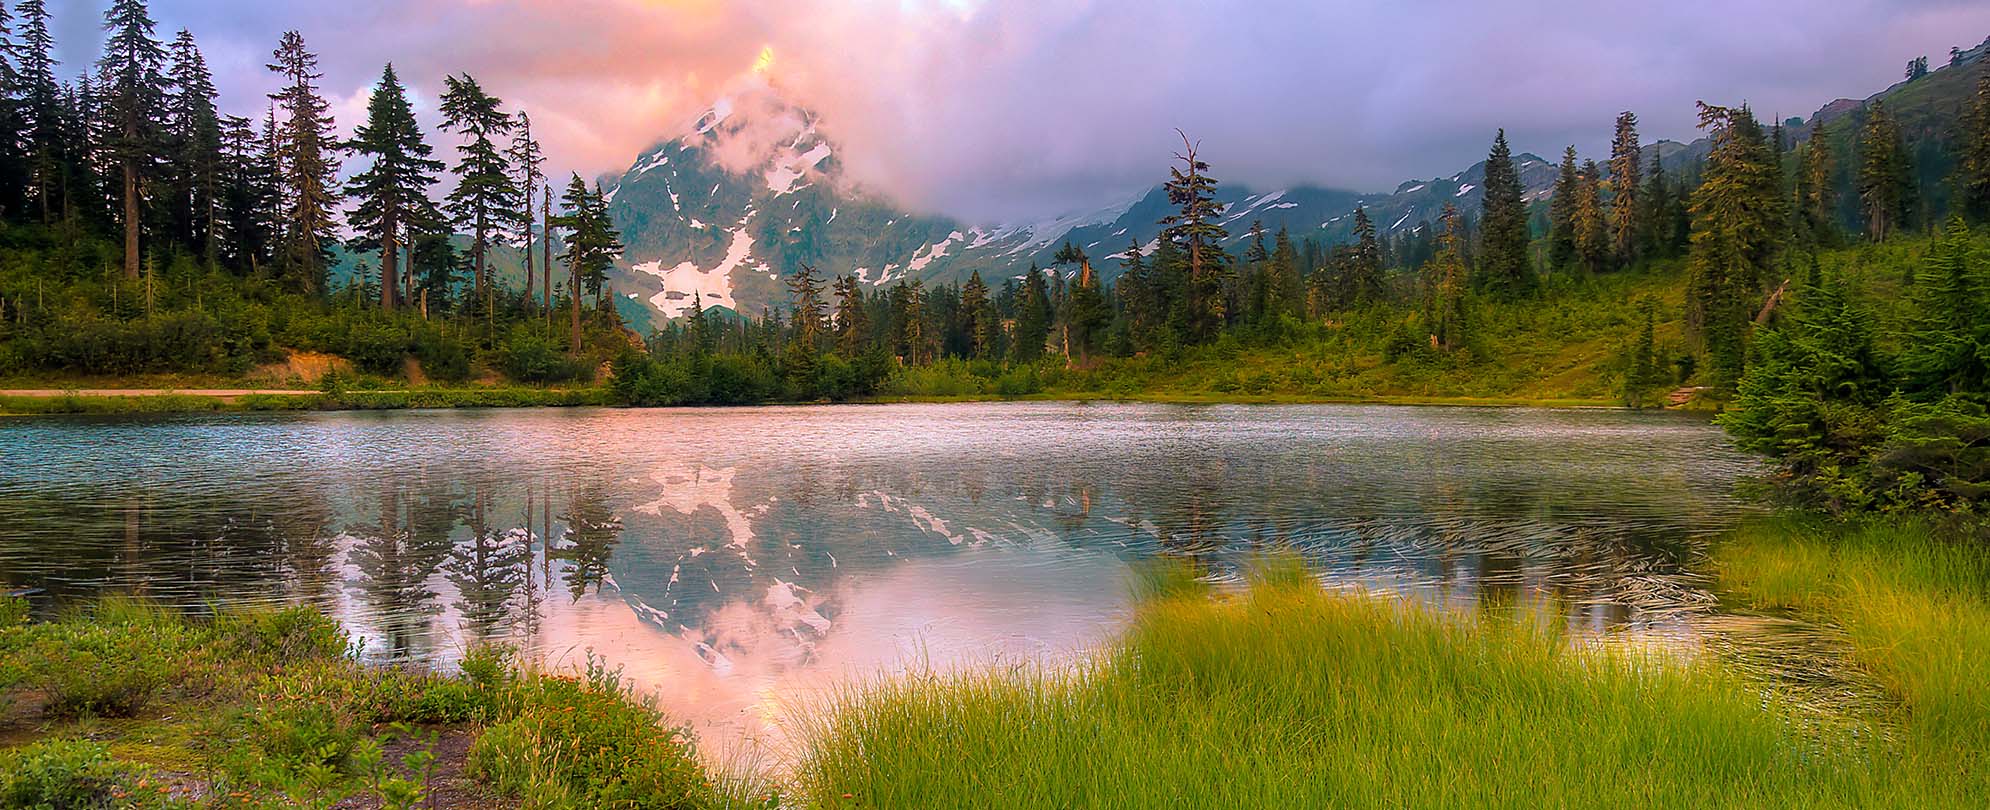 A lake, trees, and Mount Shuksan covered in clouds at sunset.